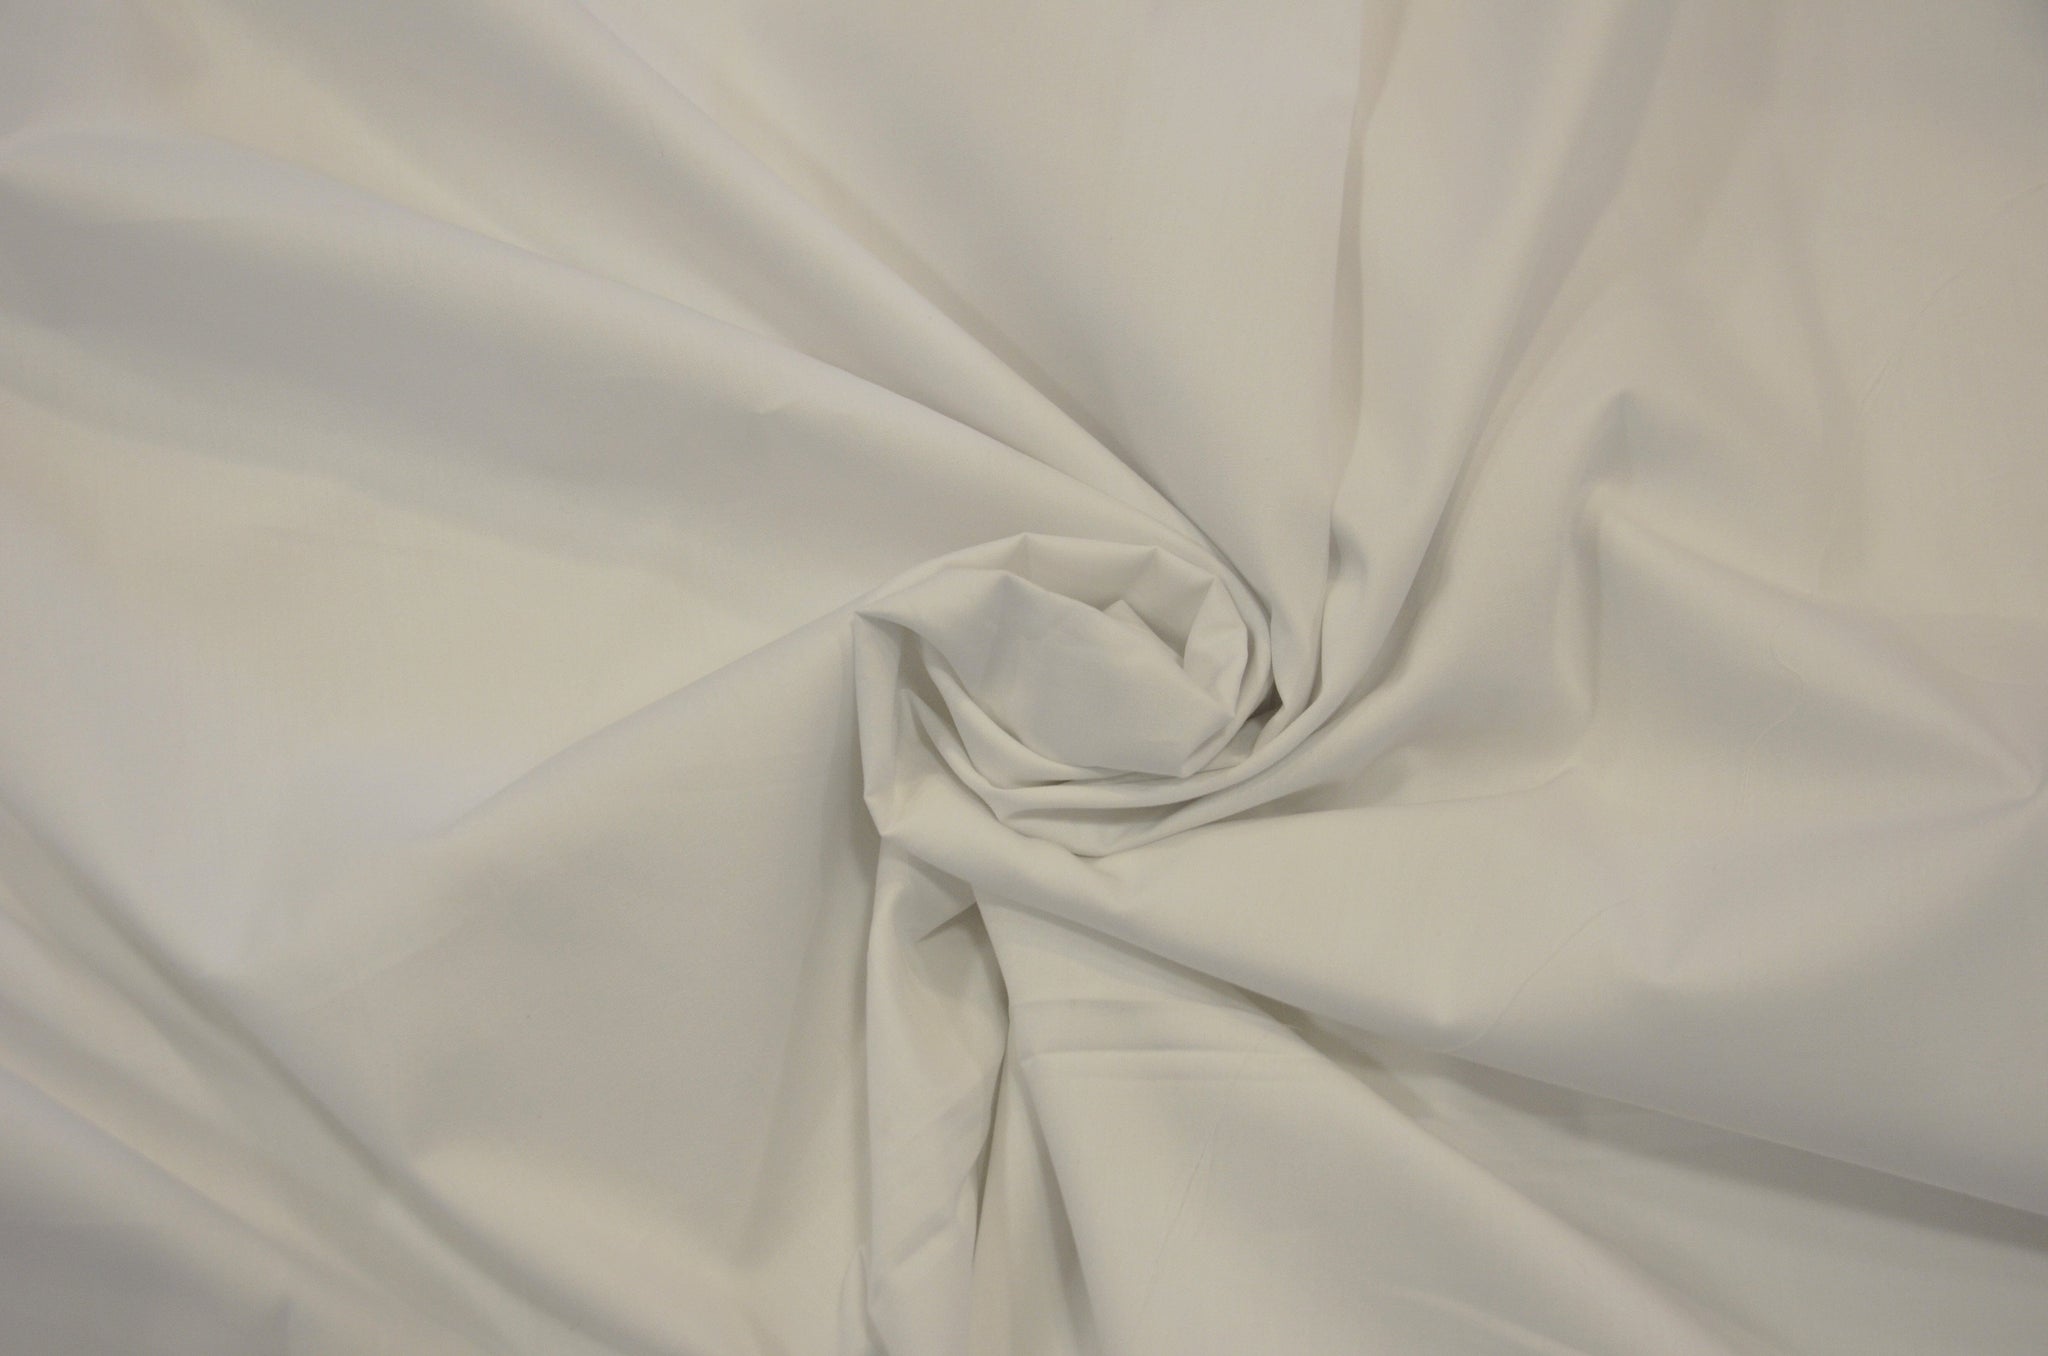 Lining Fabric (Poly/Cotton) - White Twill 60 - By the Yard from